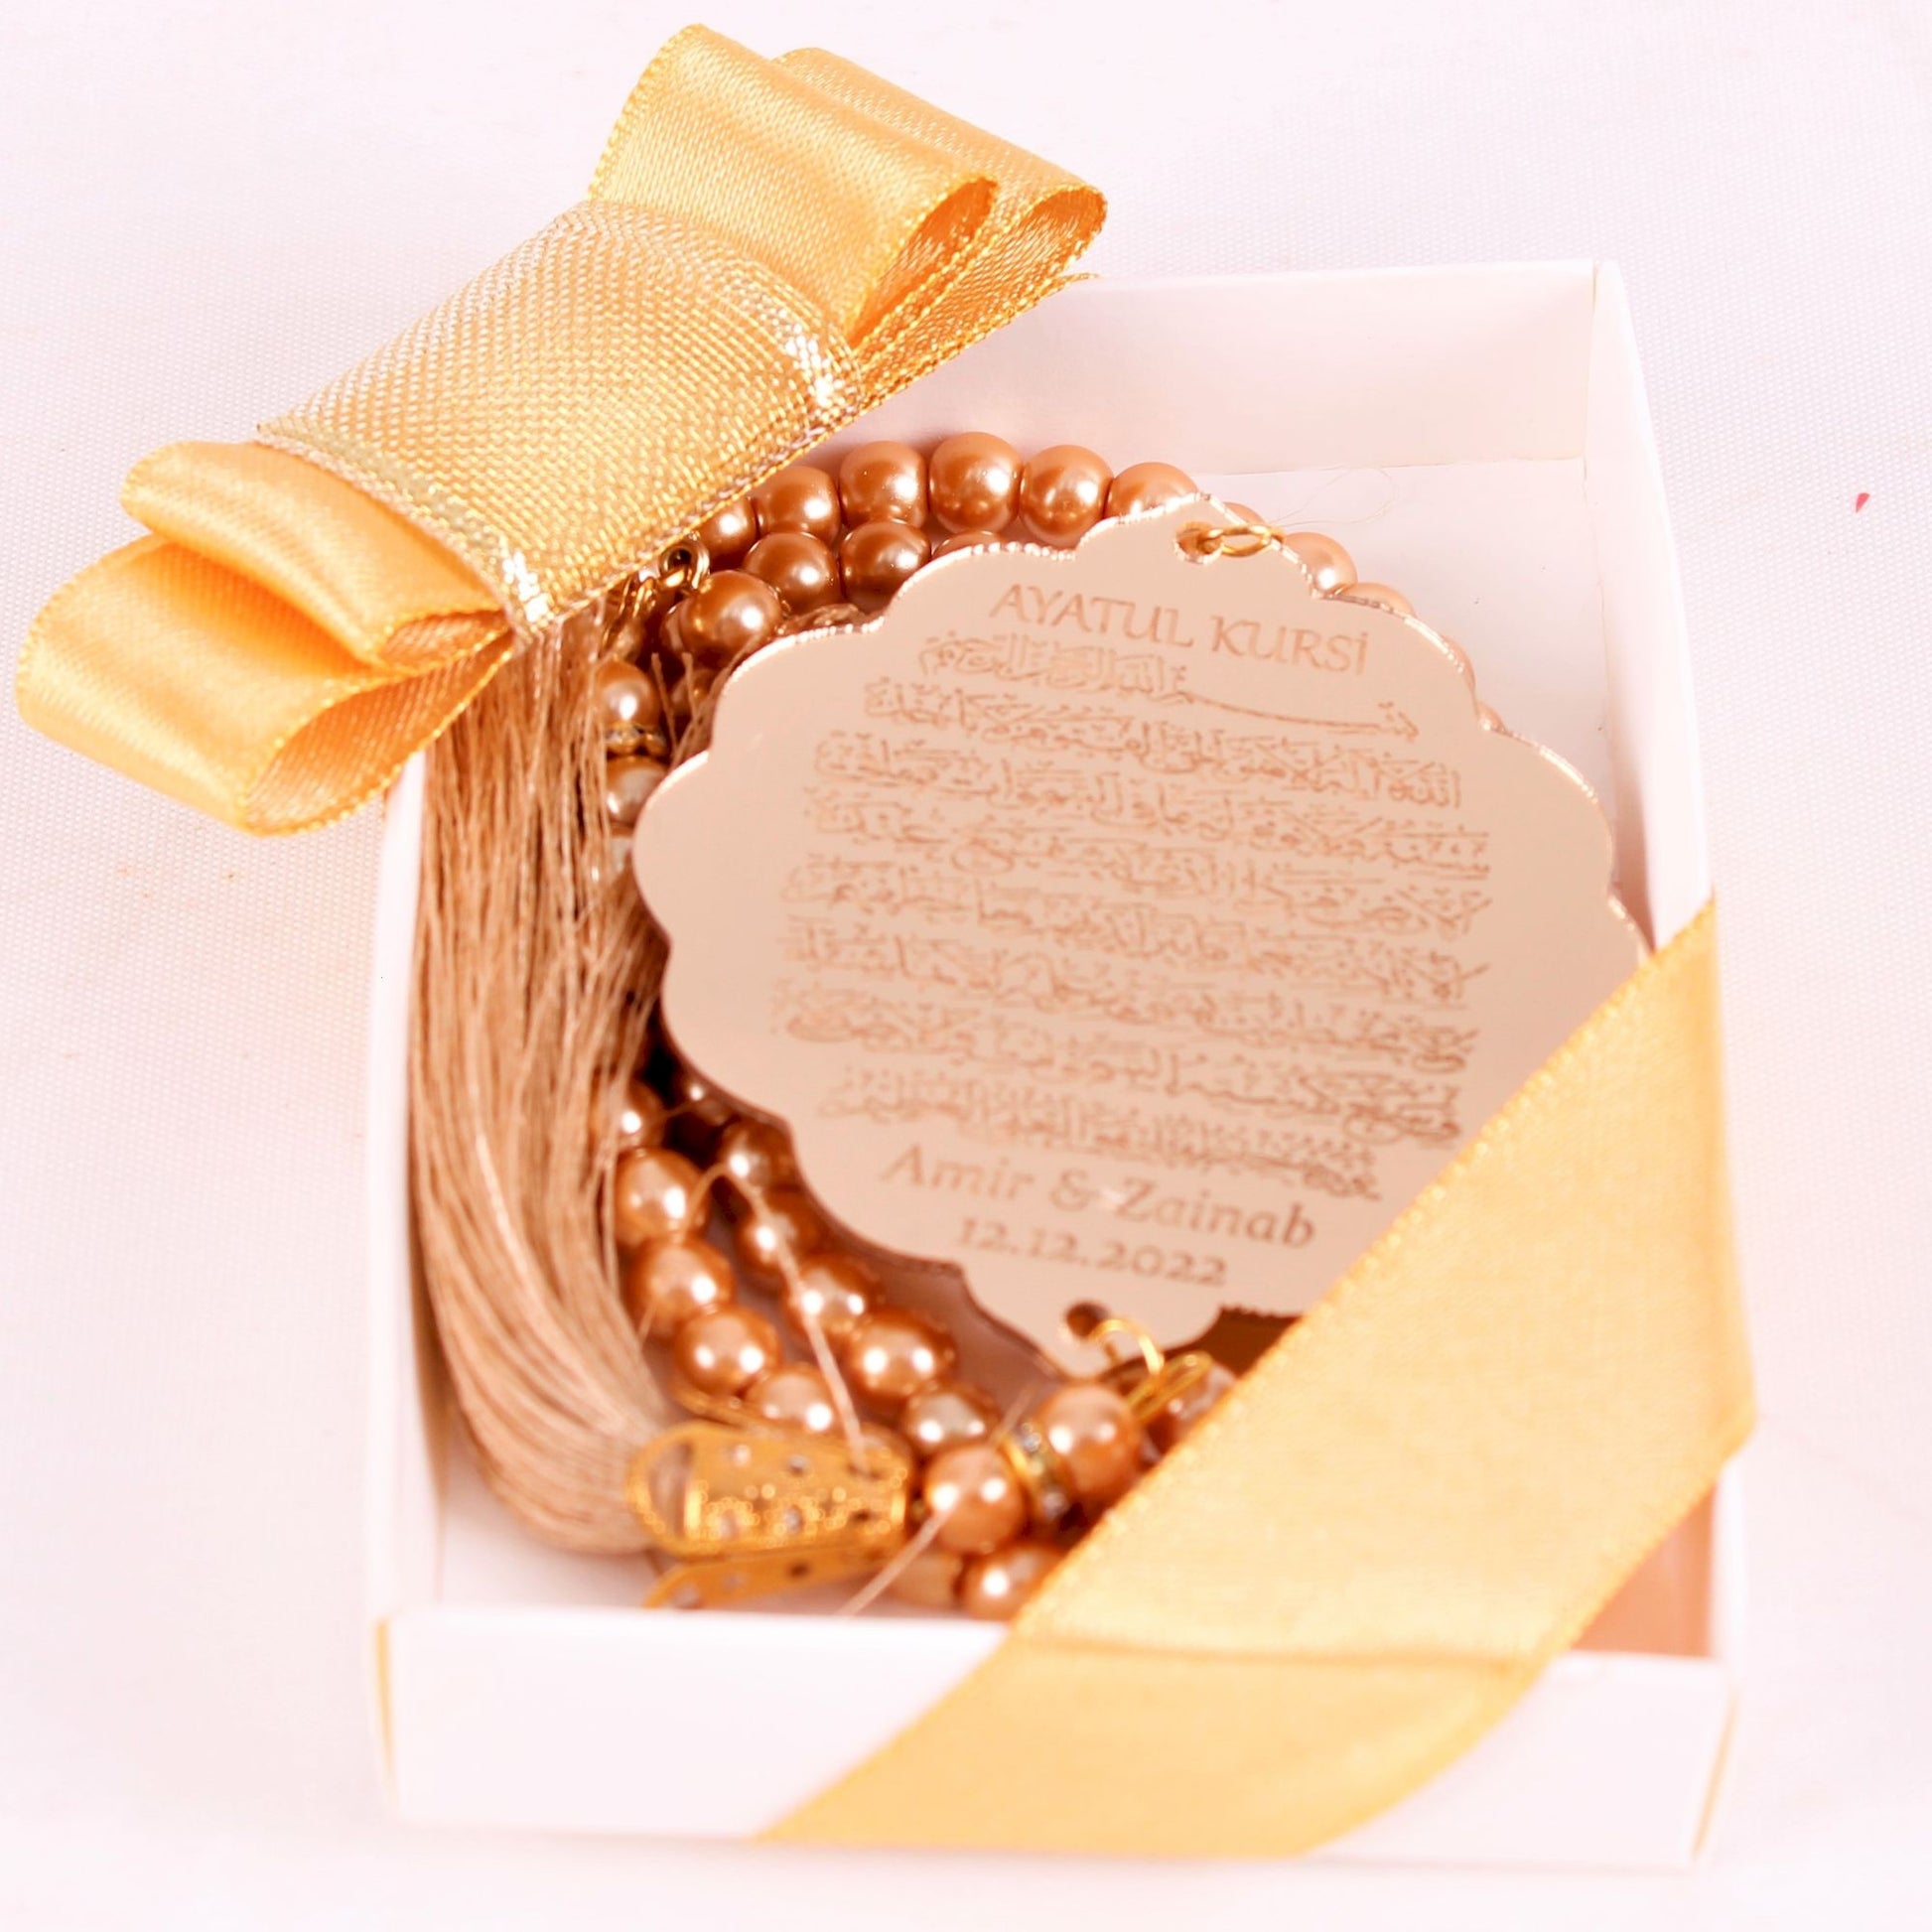 Personalized Ayatul Kursi with Prayer Beads Wedding Islamic Favours - Islamic Elite Favors is a handmade gift shop offering a wide variety of unique and personalized gifts for all occasions. Whether you're looking for the perfect Ramadan, Eid, Hajj, wedding gift or something special for a birthday, baby shower or anniversary, we have something for everyone. High quality, made with love.